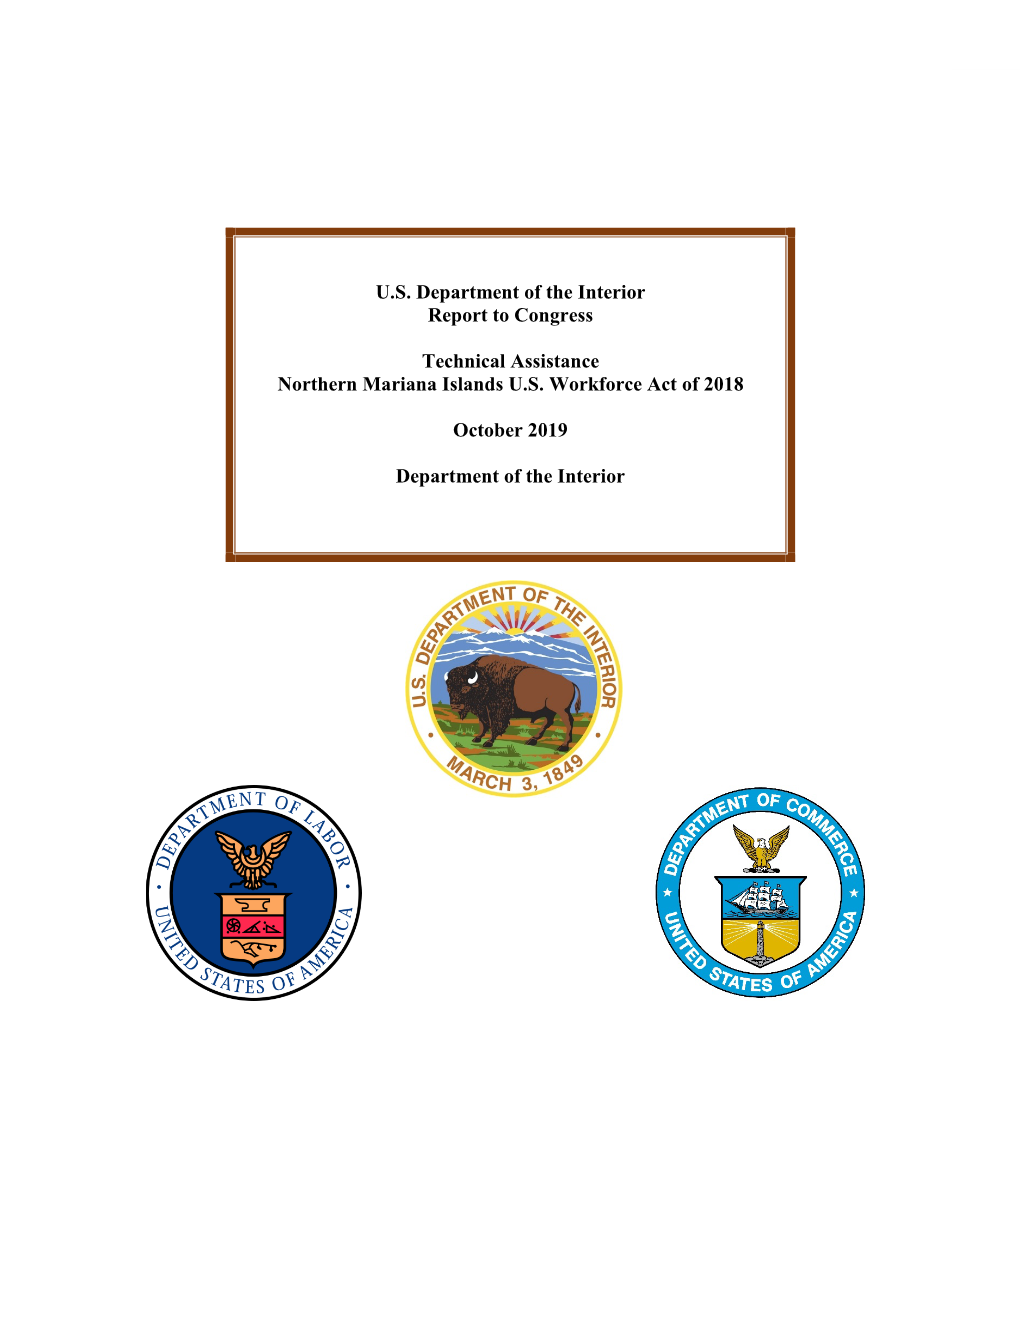 Report on Northern Mariana Islands Workforce Act of 2018, U.S. Public